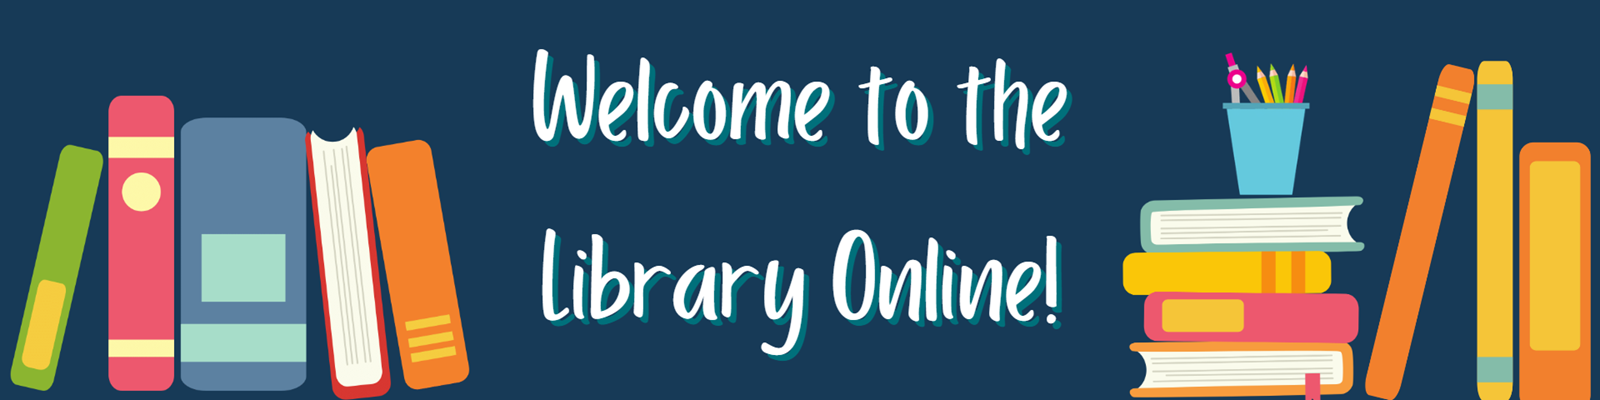 Welcome%20to%20the%20Library%20Online!-1.png